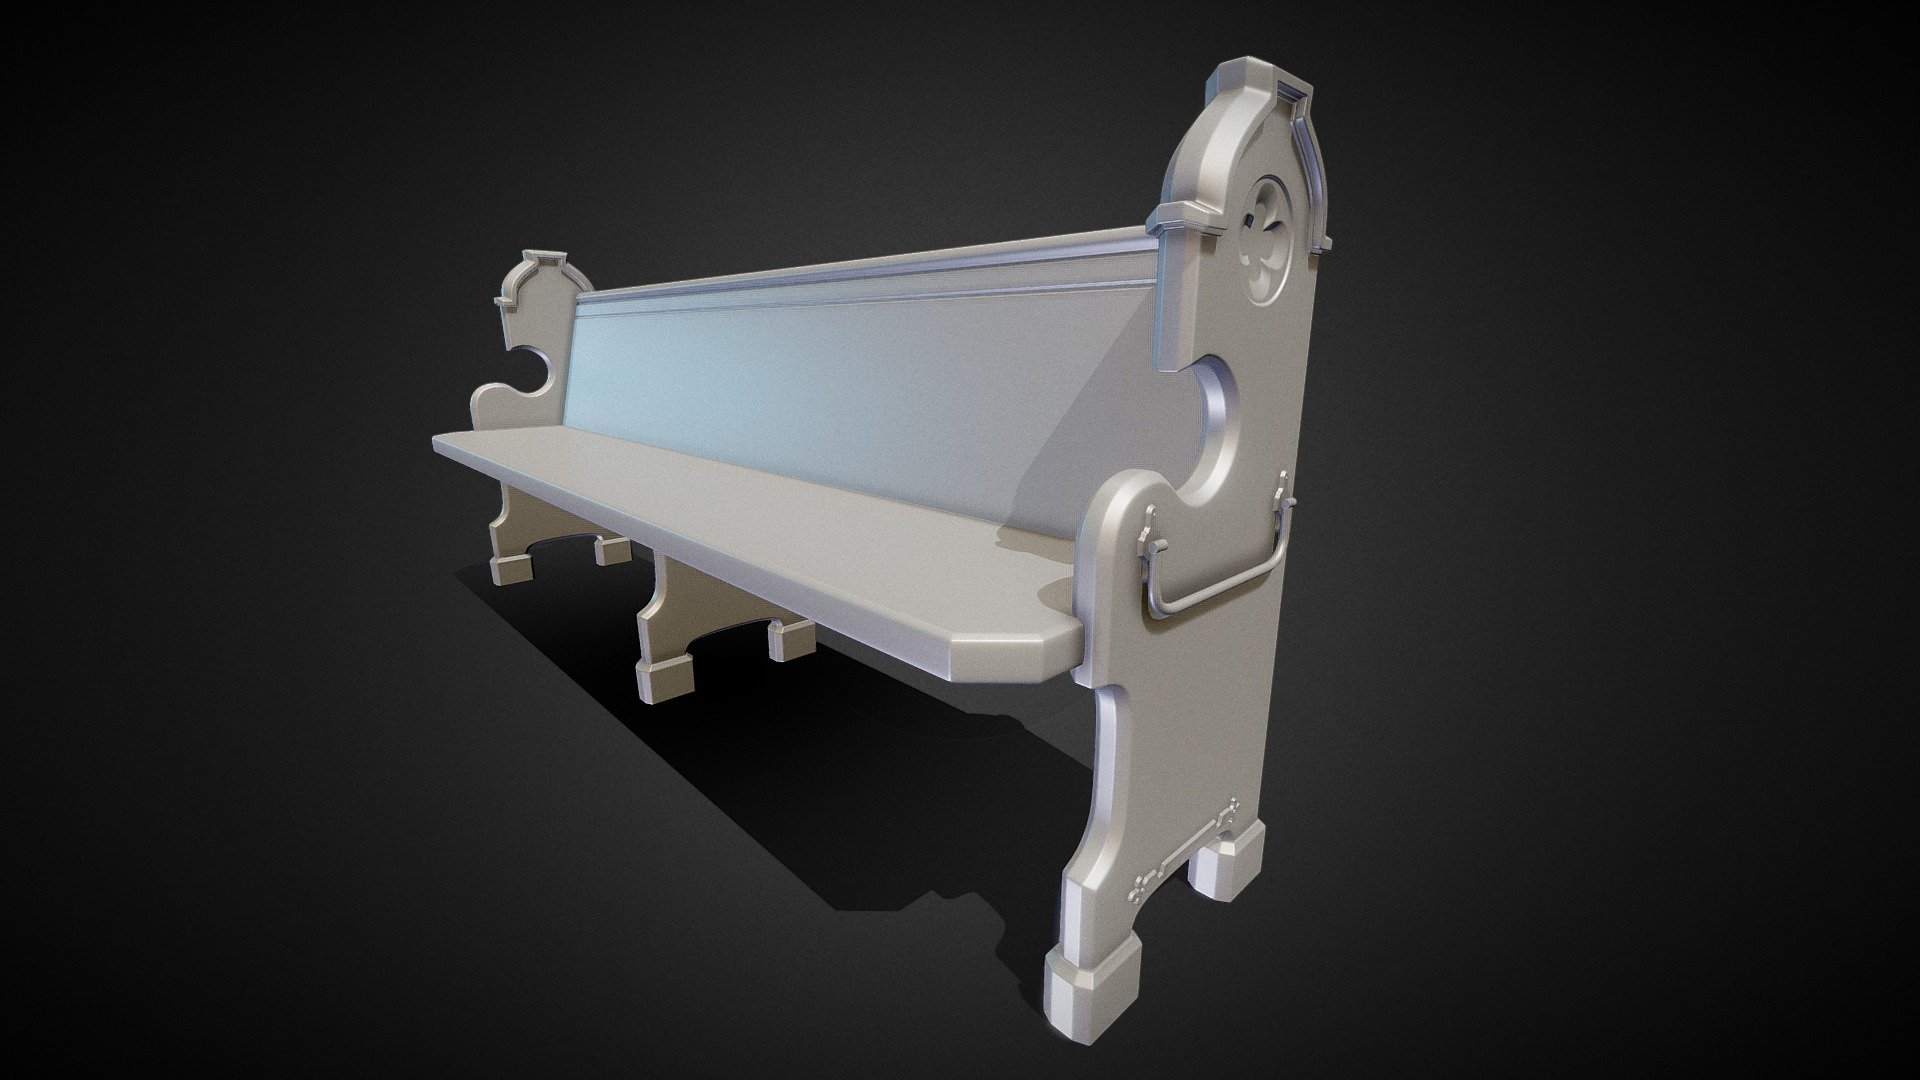 3D High-Poly Church Pew Bench! Excellent asset for 3D Environment Artist to extract high-poly details for textures maps and create game assets! Makes a great hero piece and landmark for your 3D project!

Features:
* Additional Maya File, sub-division ready, for further editing for additional detail!
* Unique Church Bench design!

An excellent 3D asset for 3D game development or your personal project!
Purchase Today! - 3D Church Pew Bench - High Poly - Buy Royalty Free 3D model by Boney Toes (@boneytoes) 3d model